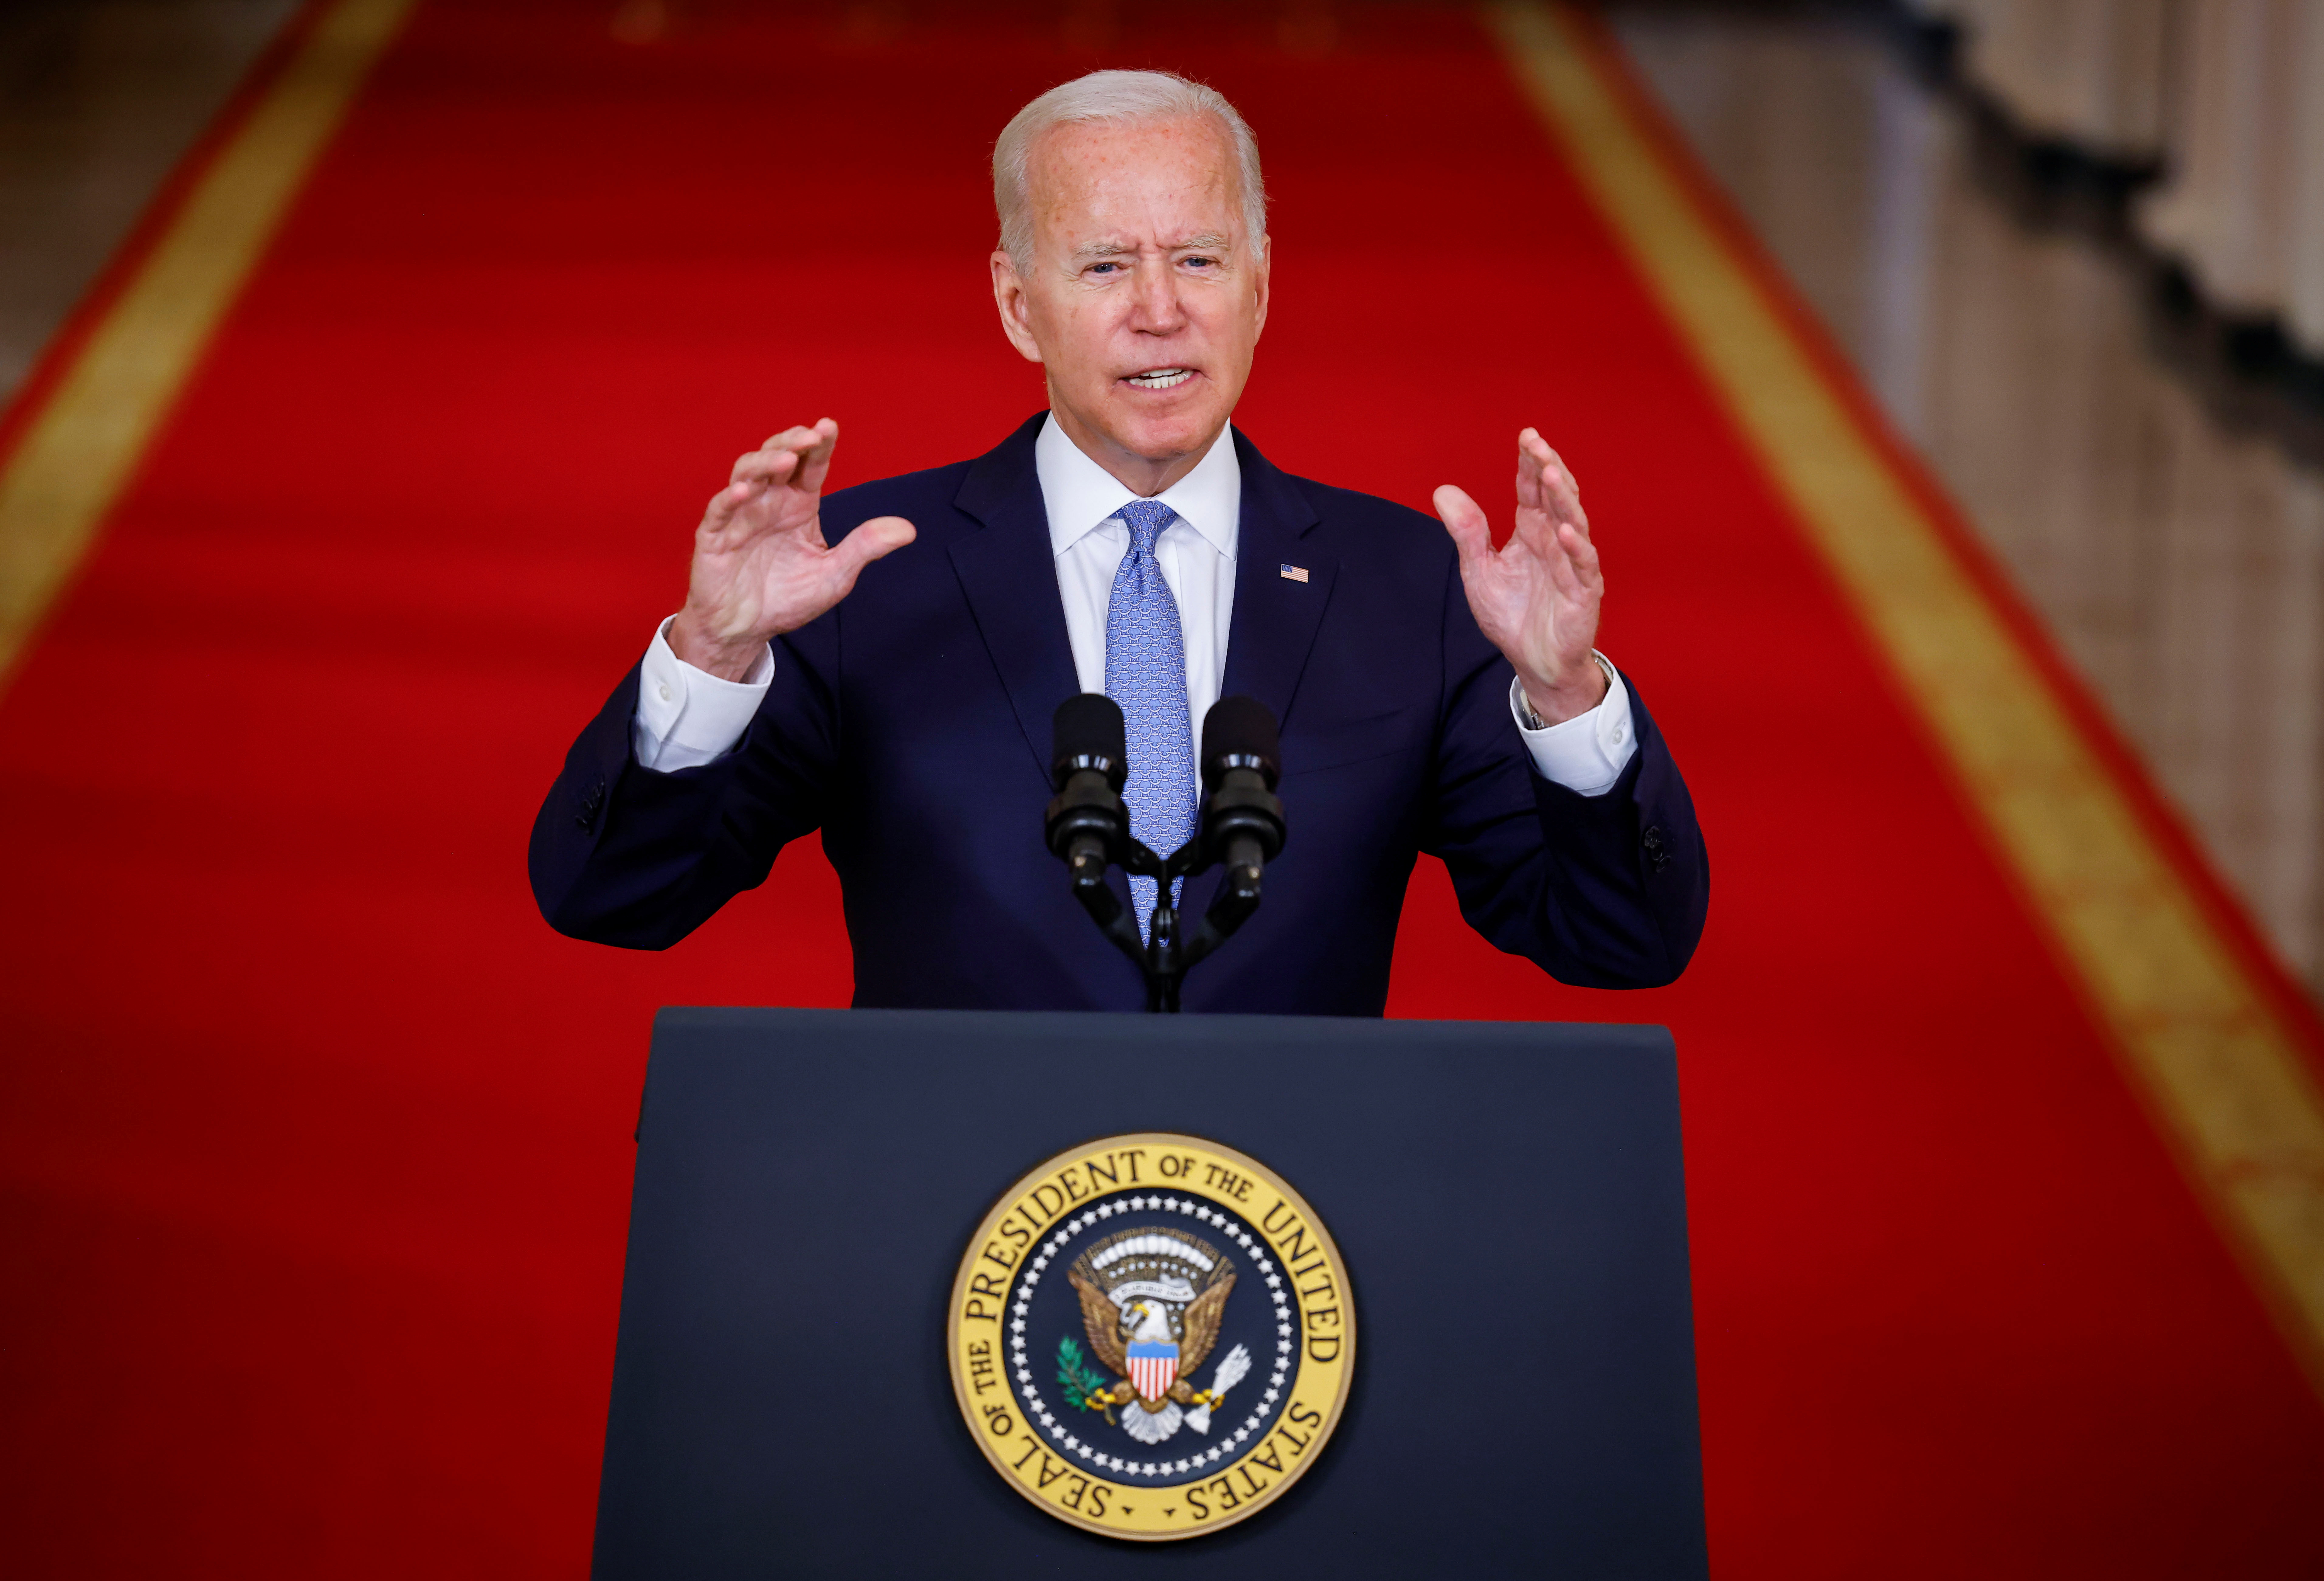 U.S. President Biden speaks about Afghanistan at the White House in Washington